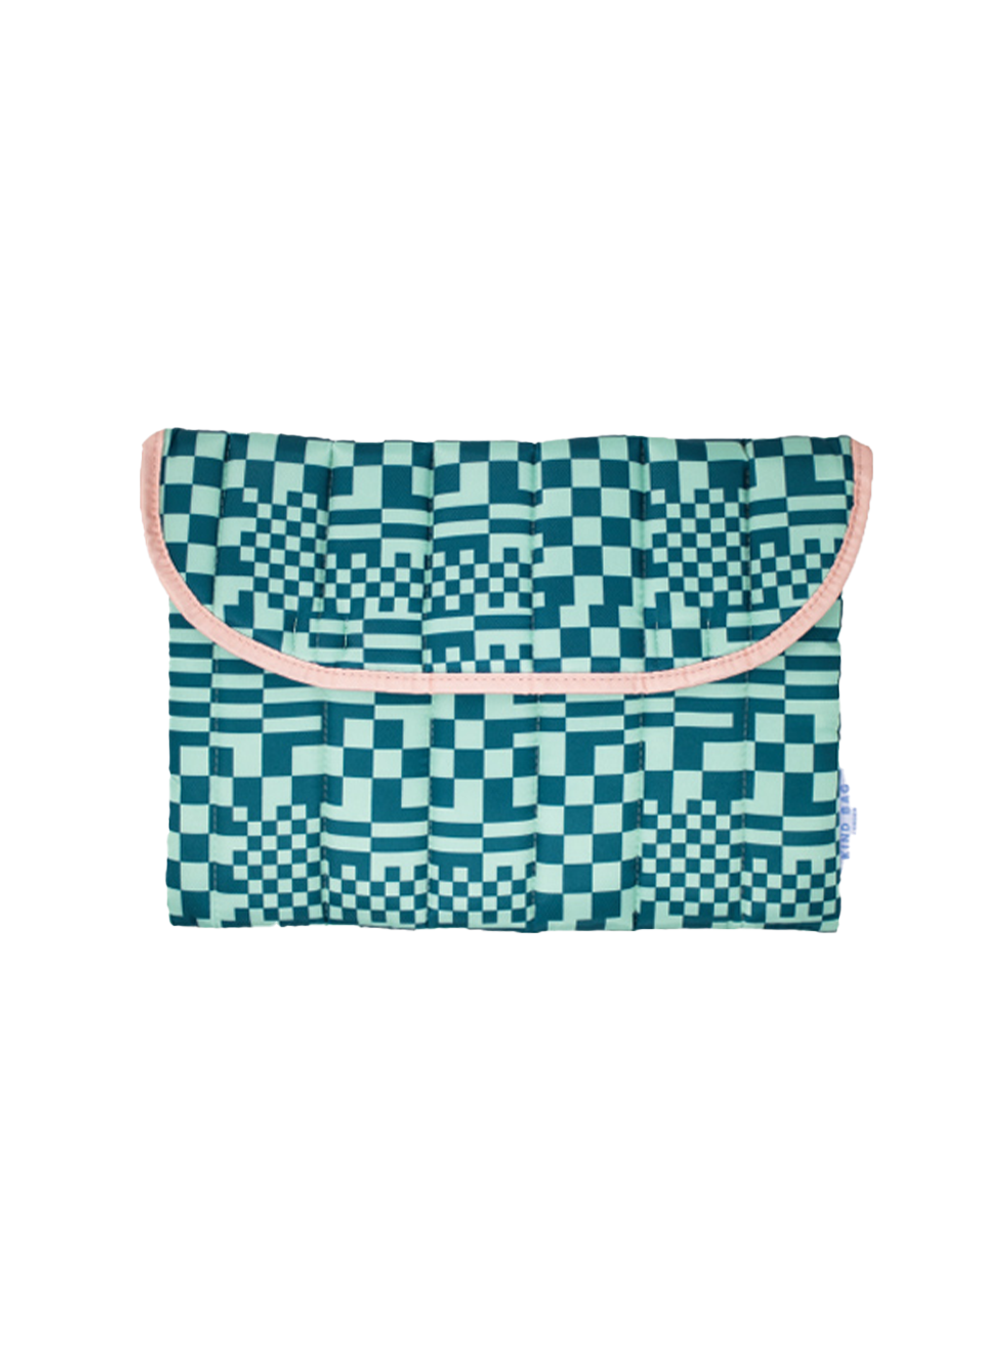 laptop sleeve Trippy check (13inch)